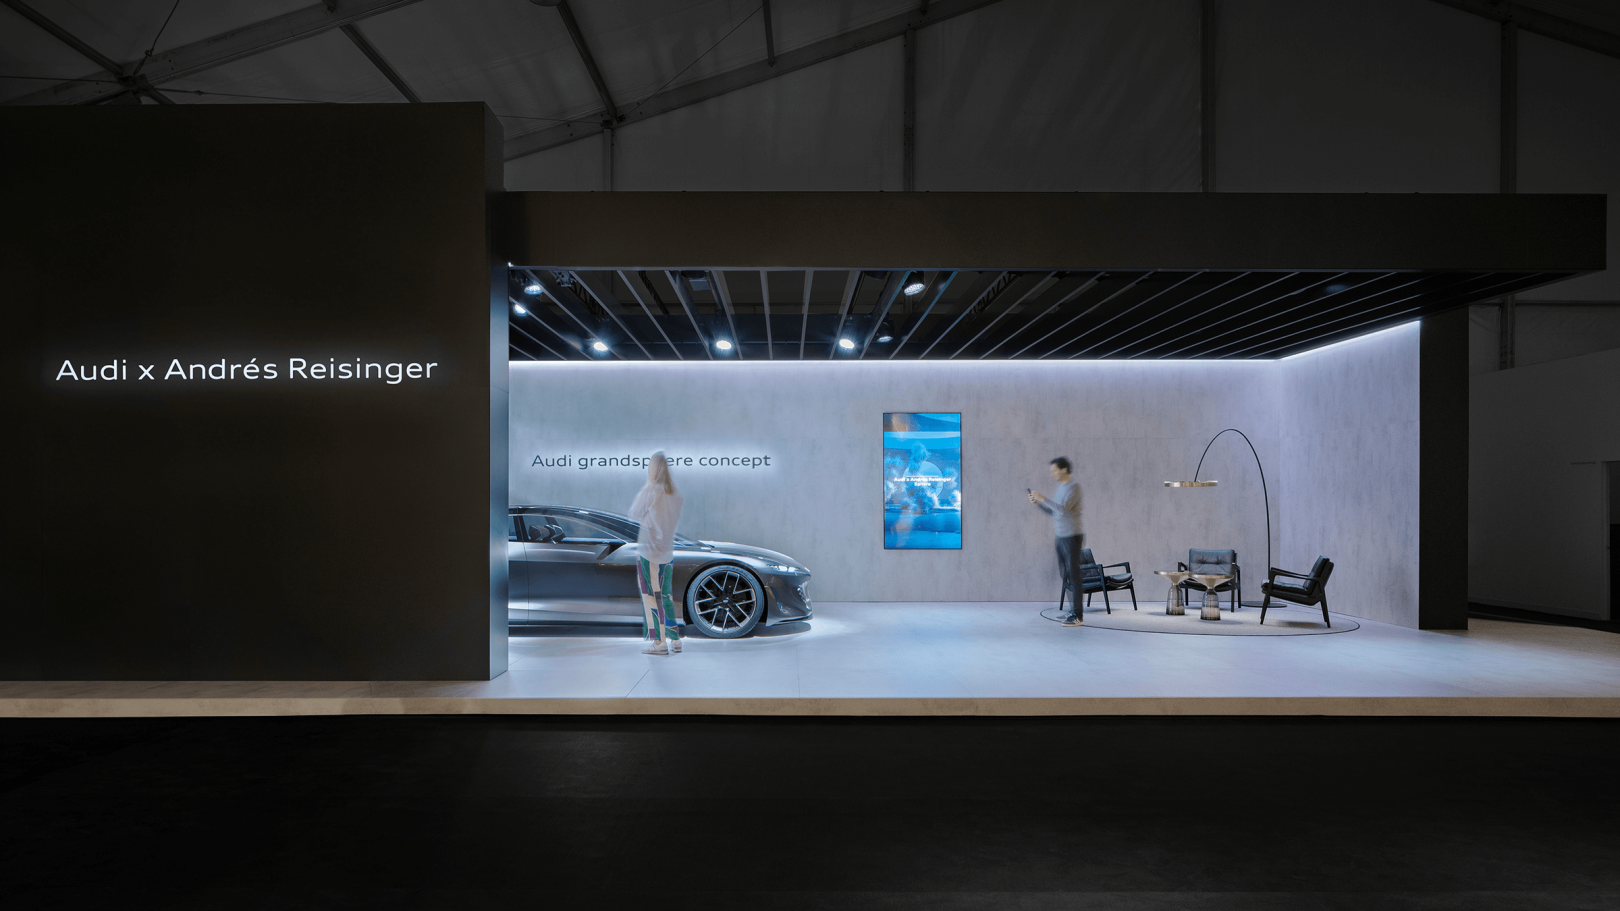 The Audi booth at the Design Miami/